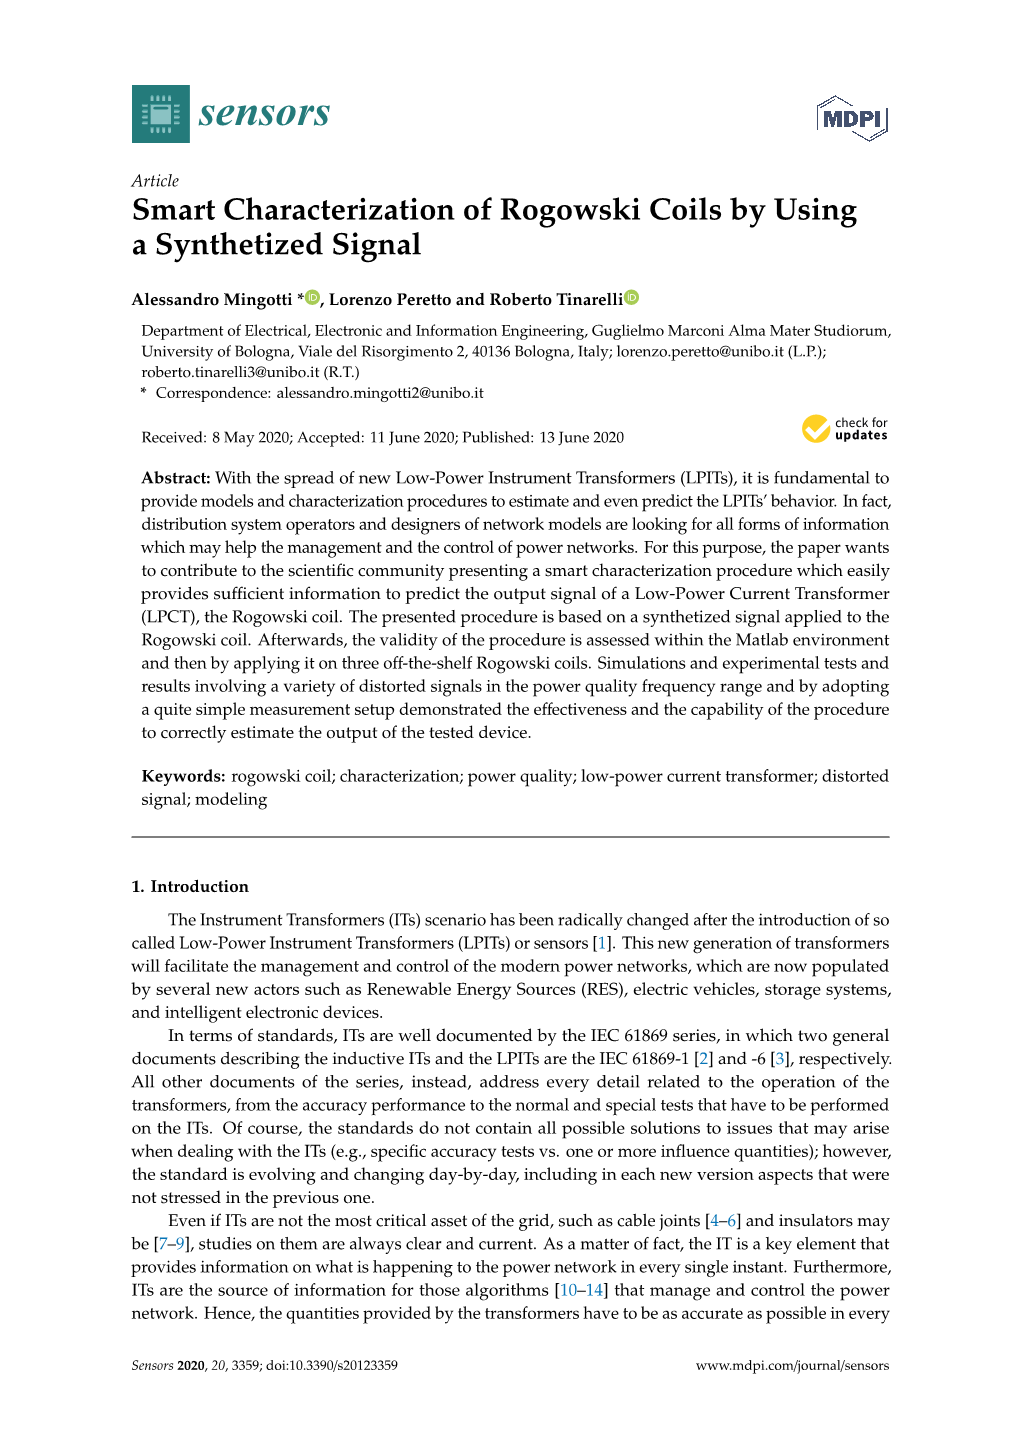 Smart Characterization of Rogowski Coils by Using a Synthetized Signal